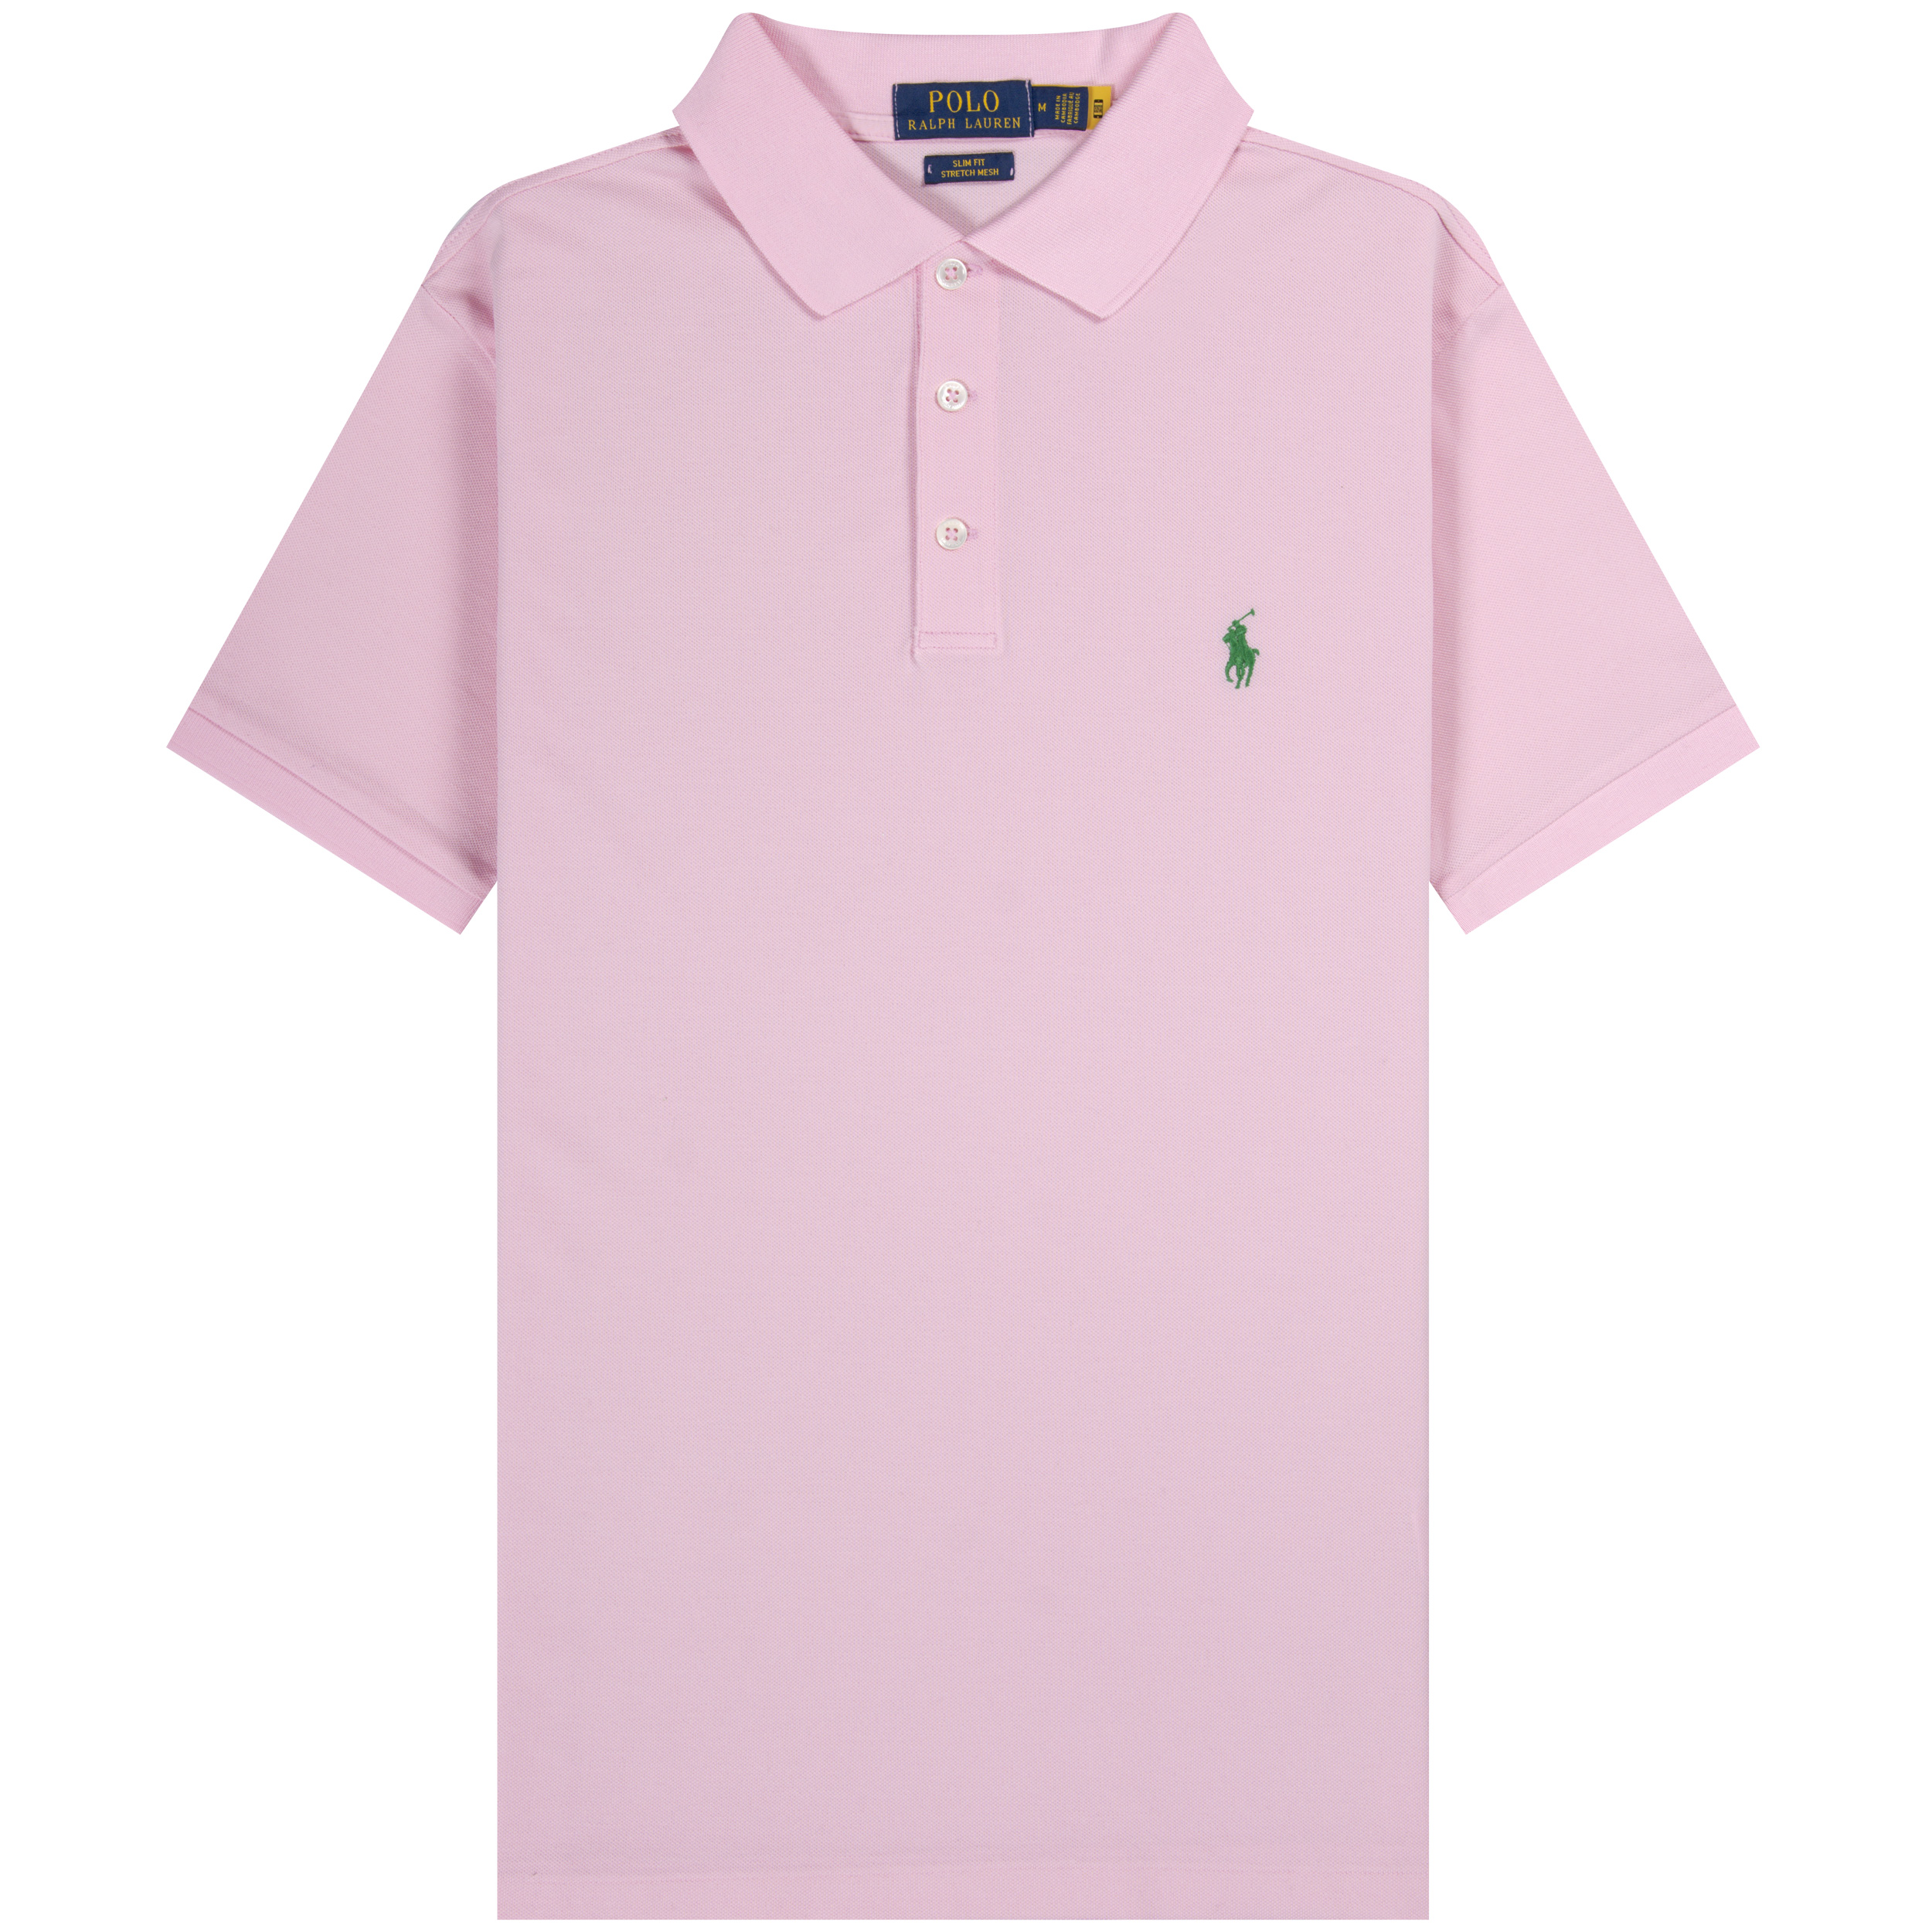 Polo Ralph Lauren ’Stretch Mesh’ Slim Fit Polo Pink